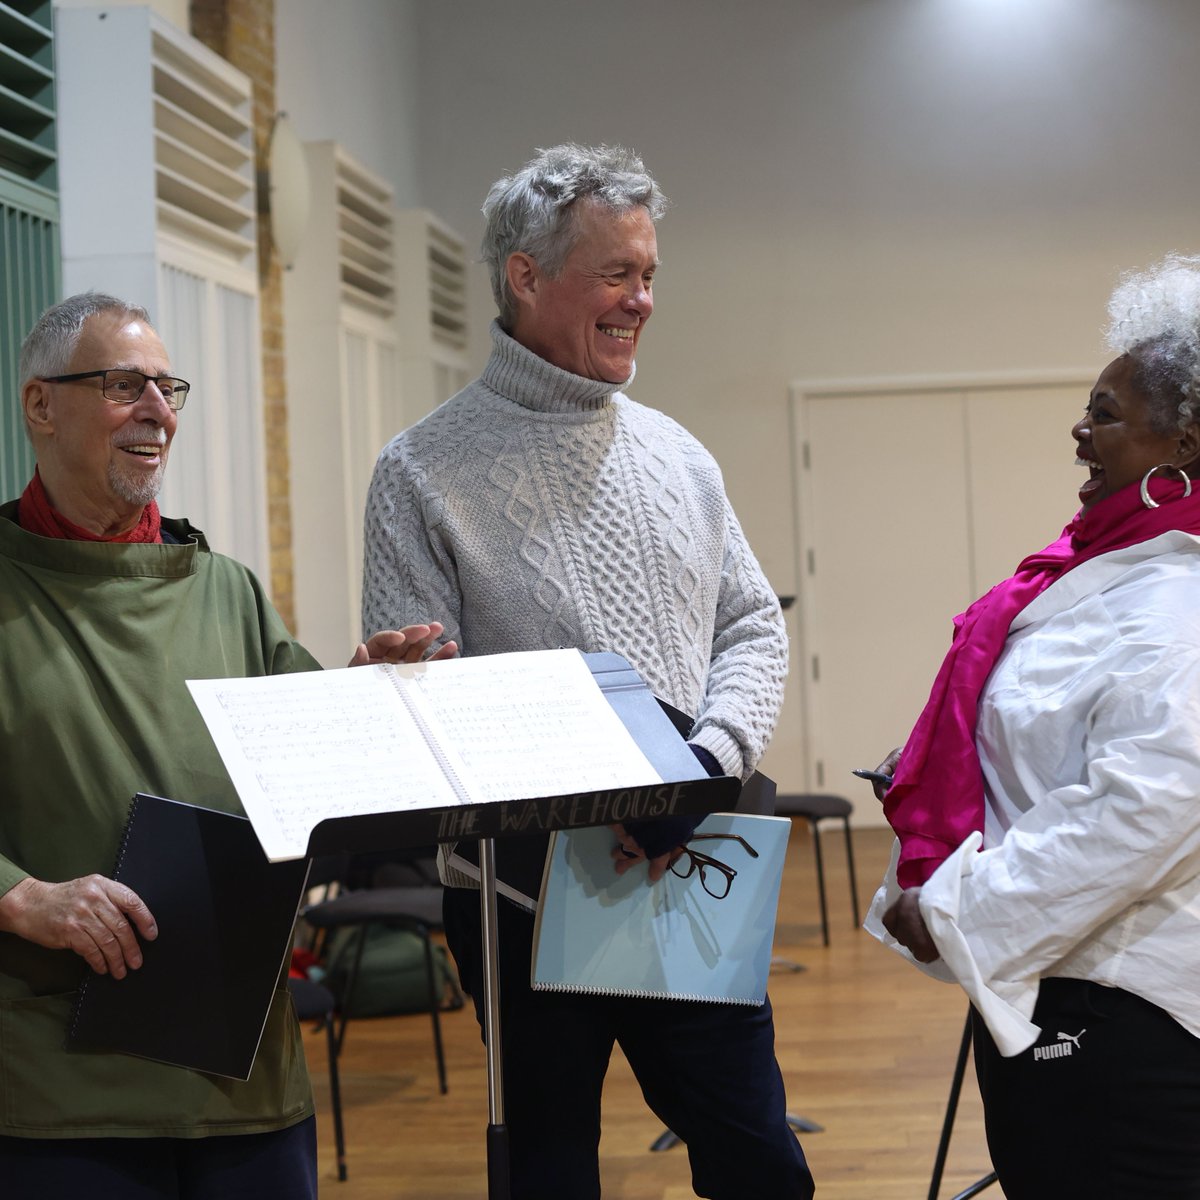 Rehearsals are well under way for tomorrow’s performance of Perfection, of a Kind: Britten v Auden at the @southbankcentre. You can still grab a ticket via: southbankcentre.co.uk/whats-on/liter…